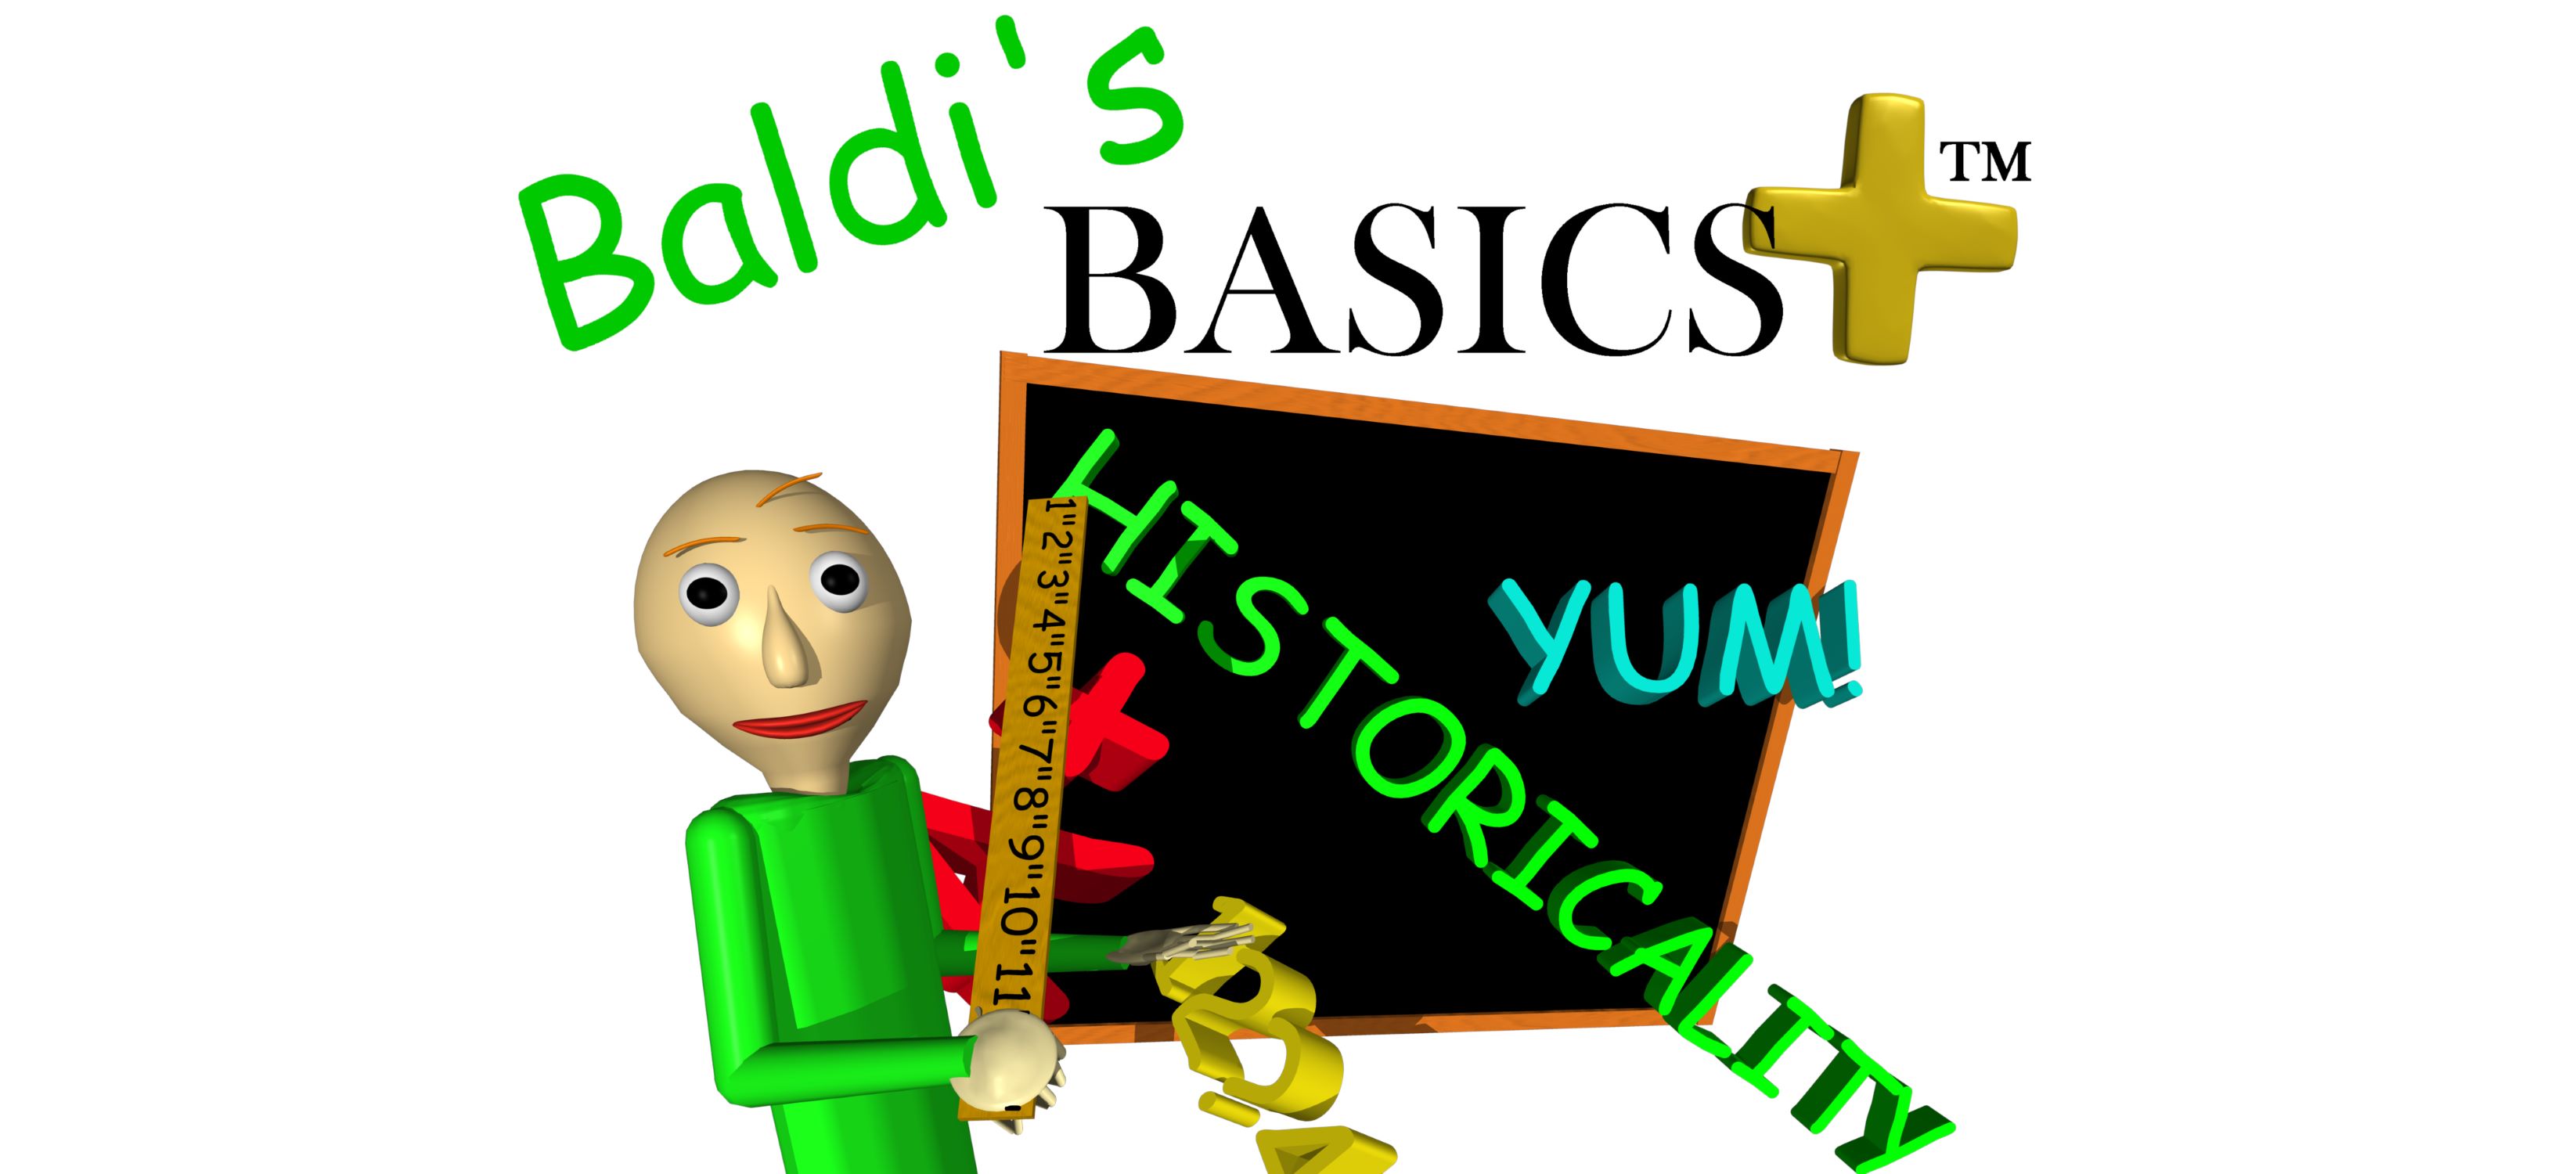 The Mind-Boggling 3rd Question In Baldi's Basics That Will Leave You Stumped!